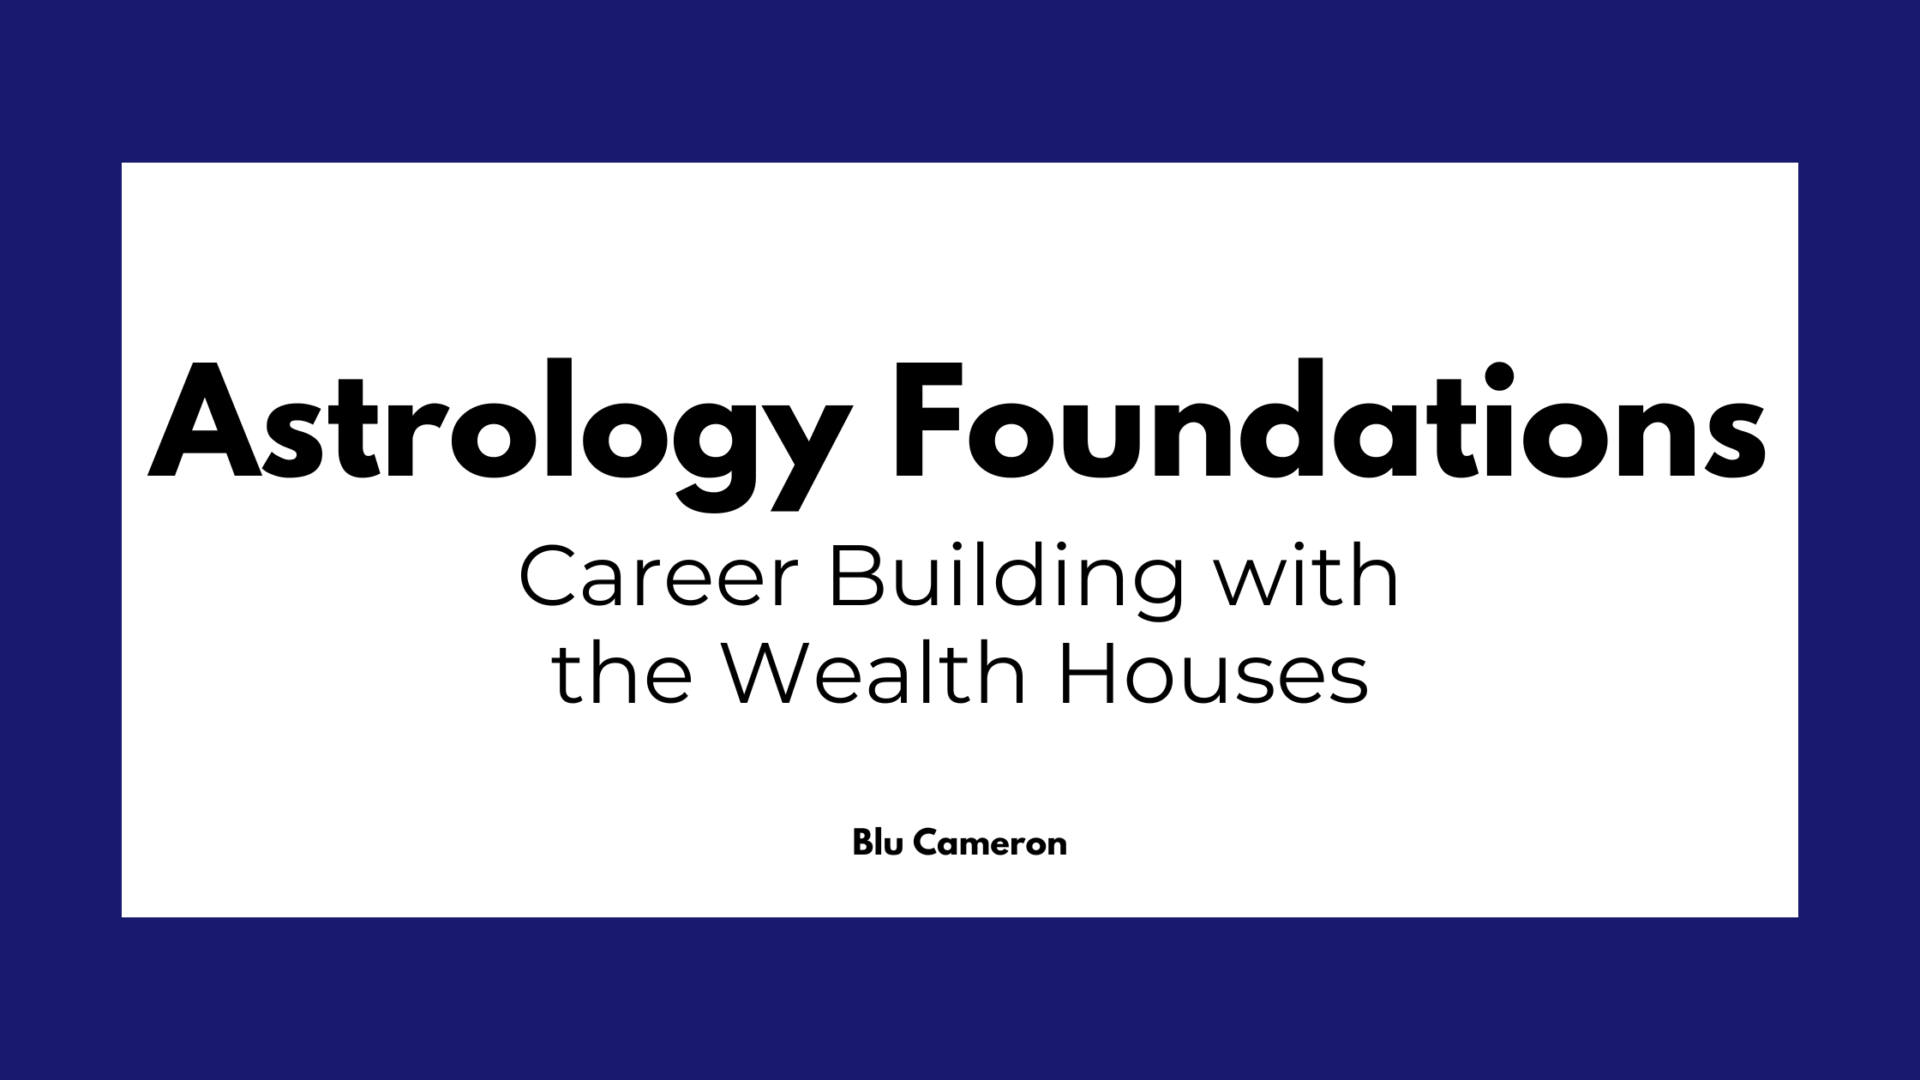 Black text against a white and purple background reads: "Career Building with the Wealth Houses"